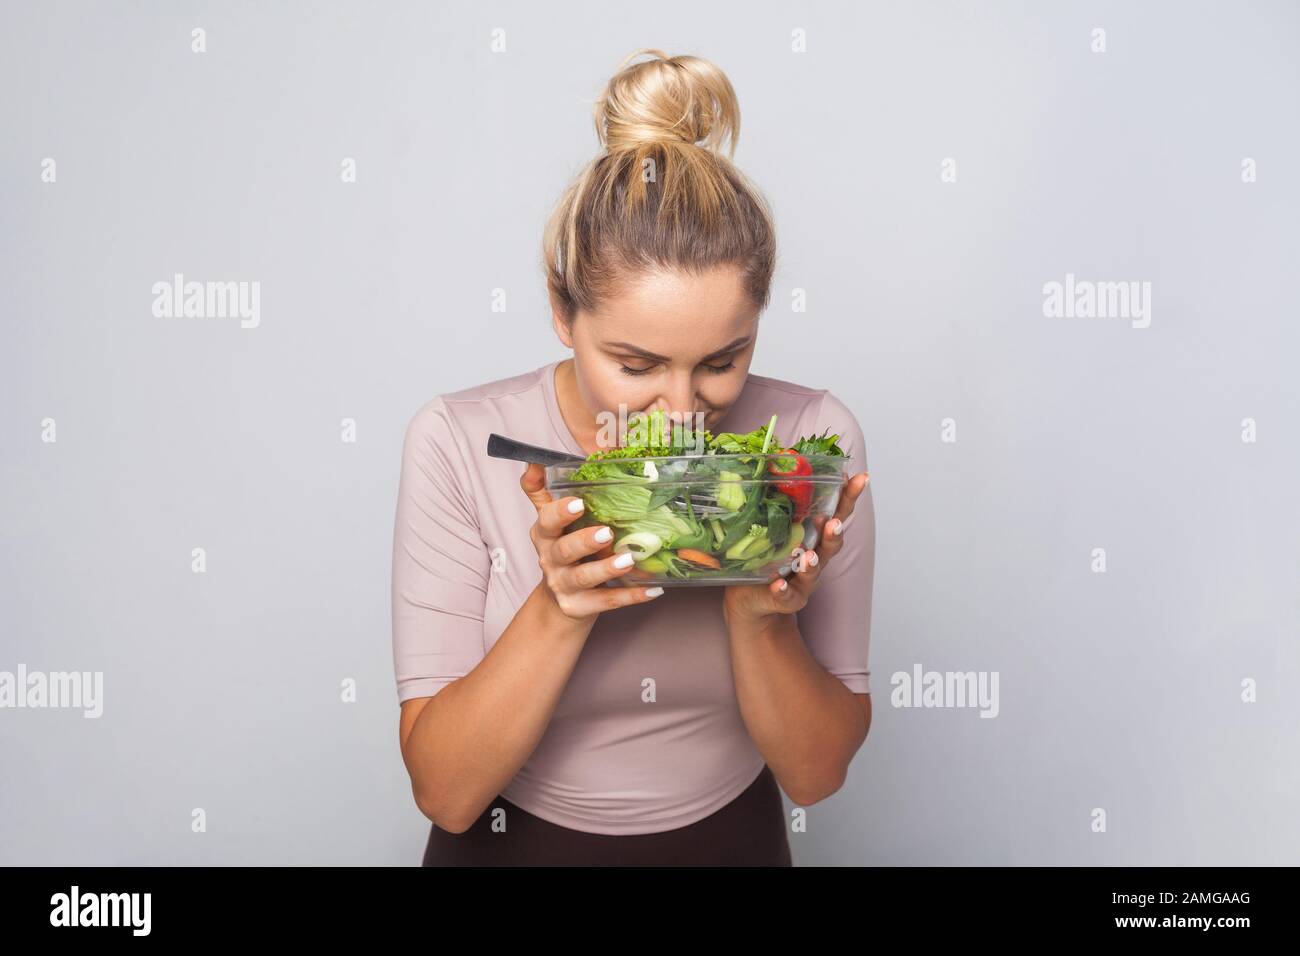 Portrait of young woman with hair bun sniffing bawl of green vegetable salad, enjoying smell of fresh healthy food, vegetarian diet, vegan nutrition. Stock Photo